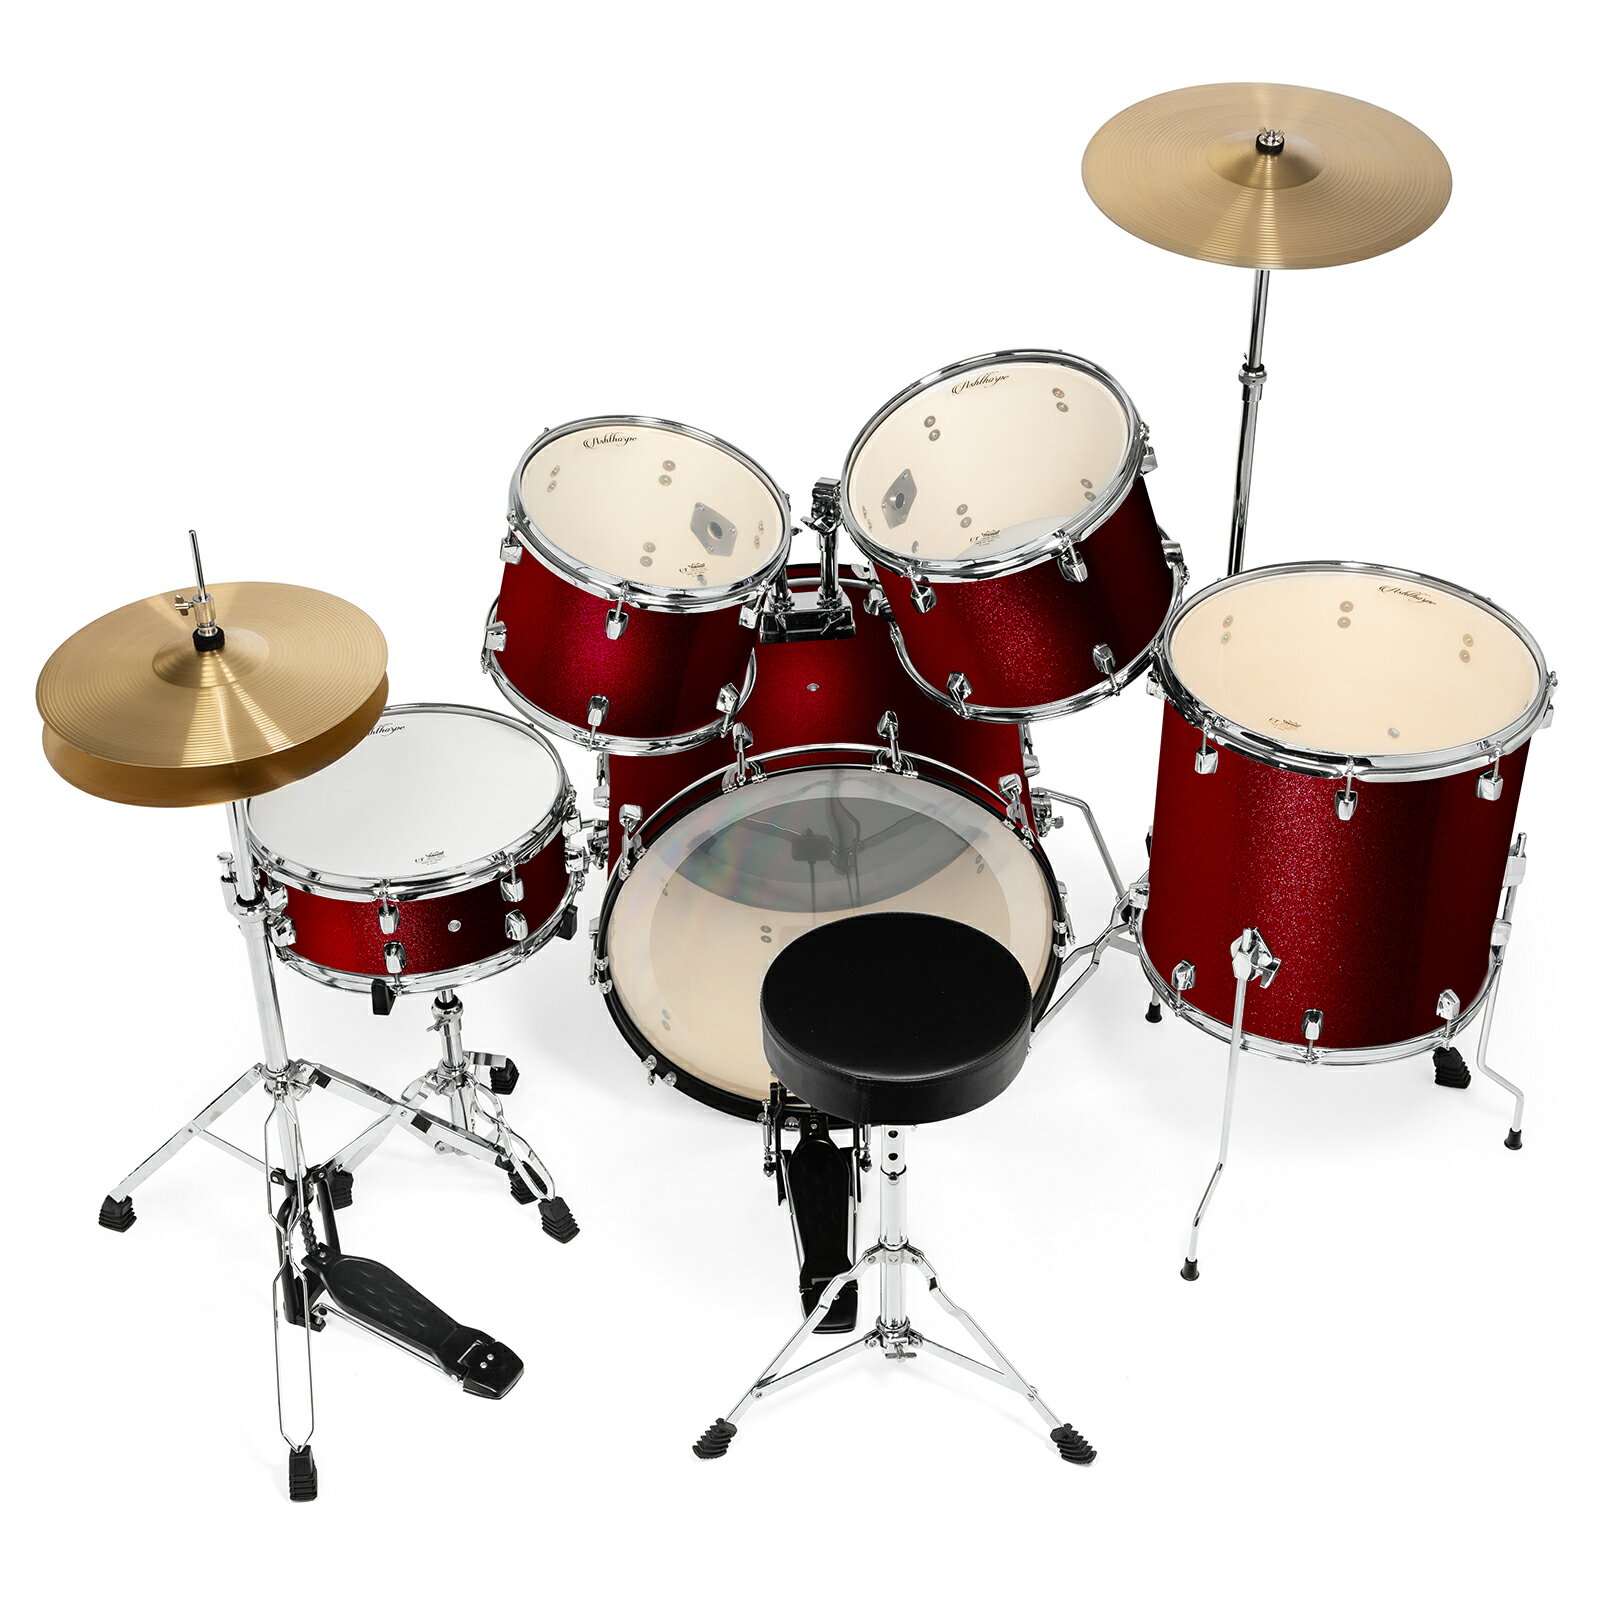 Mix Wholesale: Ashthorpe 5-Piece Full Size Adult Drum Set with Remo ...